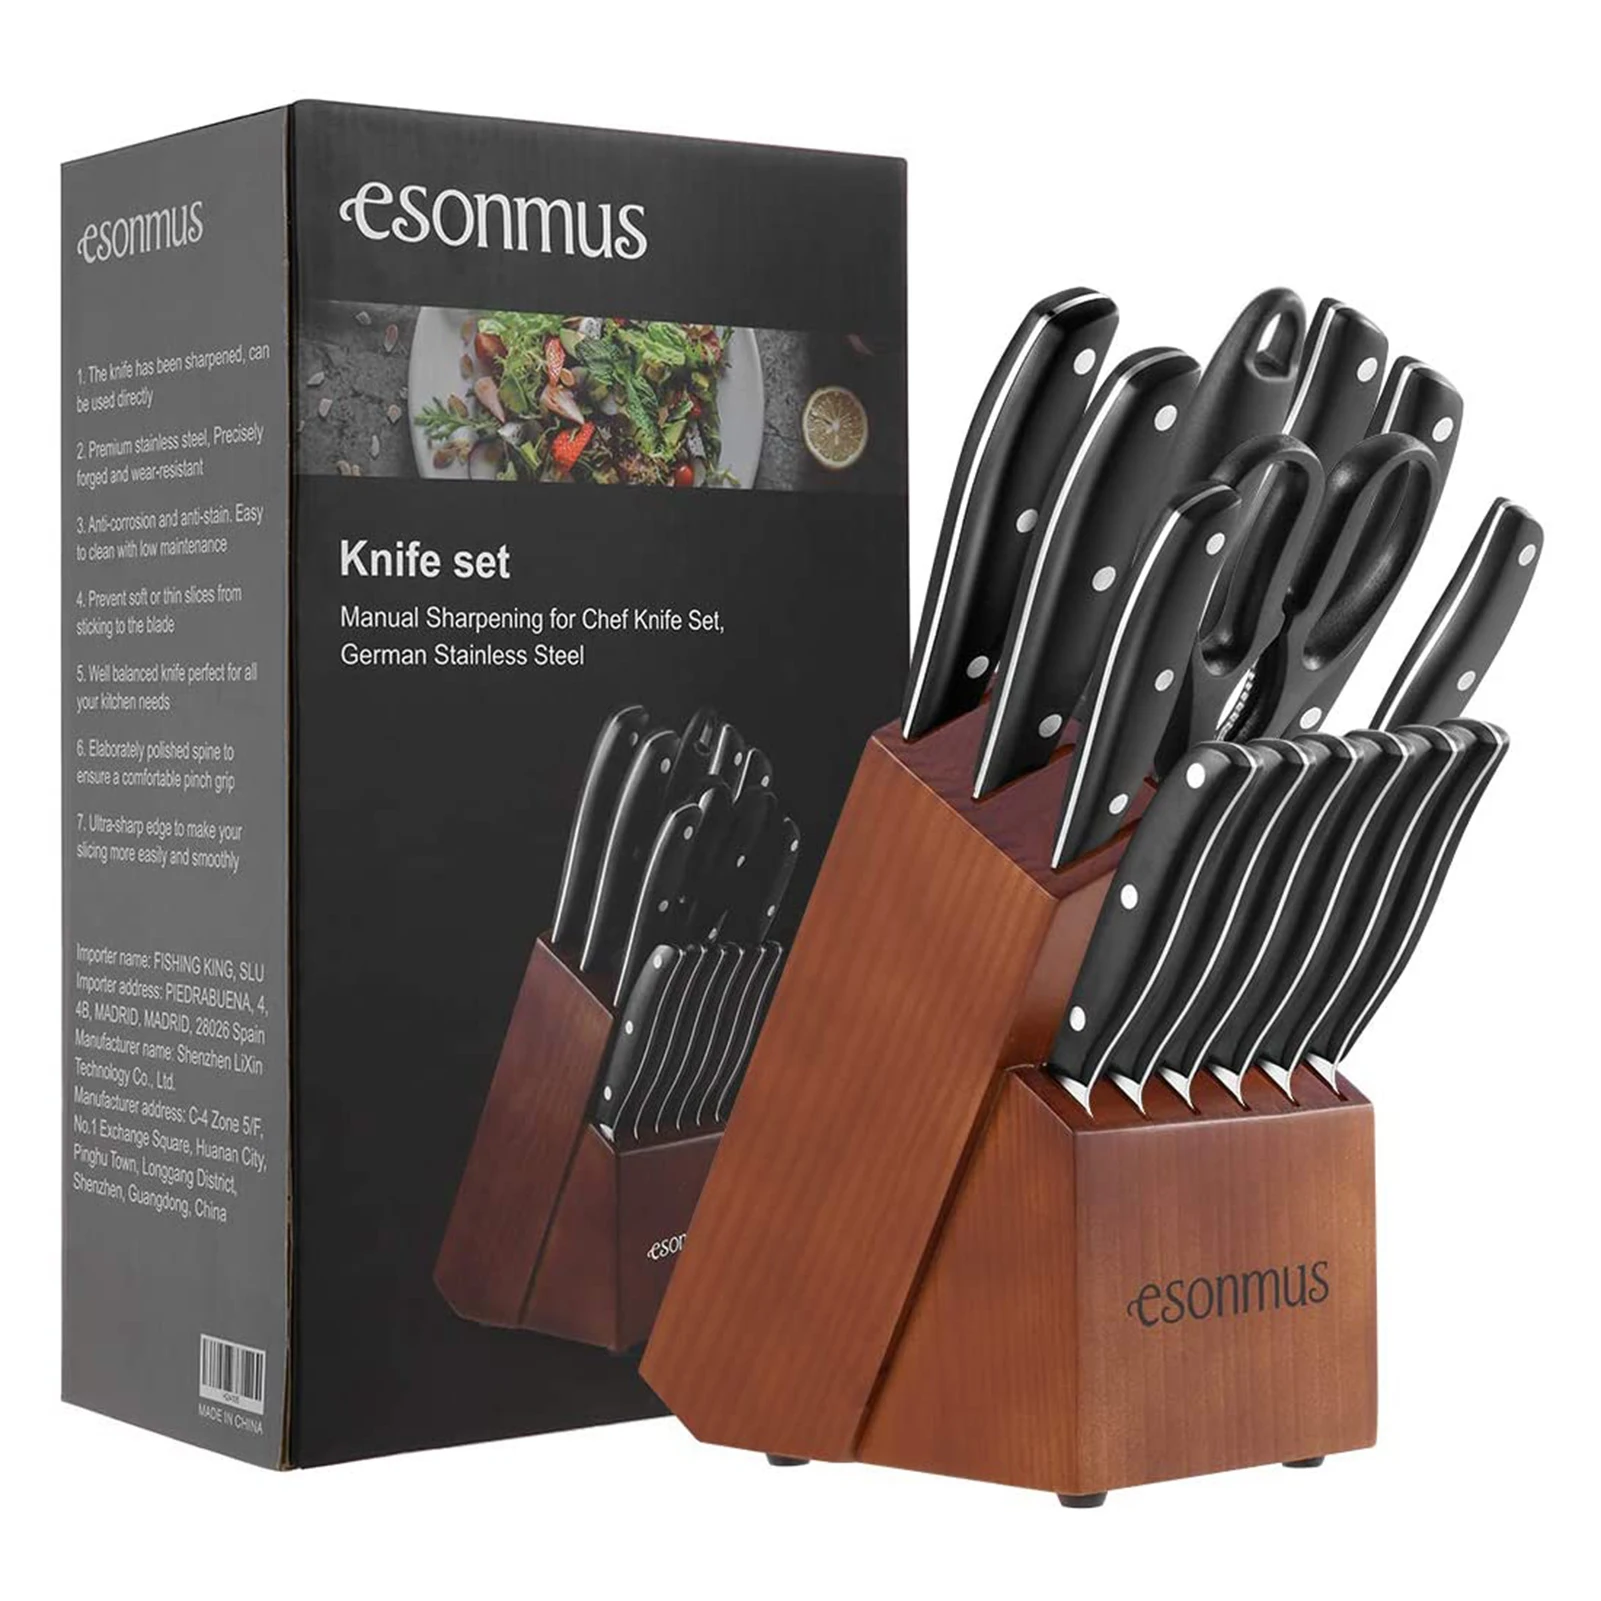 https://ae01.alicdn.com/kf/Sfc20fcc1e9a1447c9cc3d413d0332c8eV/Kitchen-Knife-Set-15PCS-Steel-knives-Chef-Knife-Kitchen-Accessories-Professional-Chef-knives-Cooking-Tools.jpg